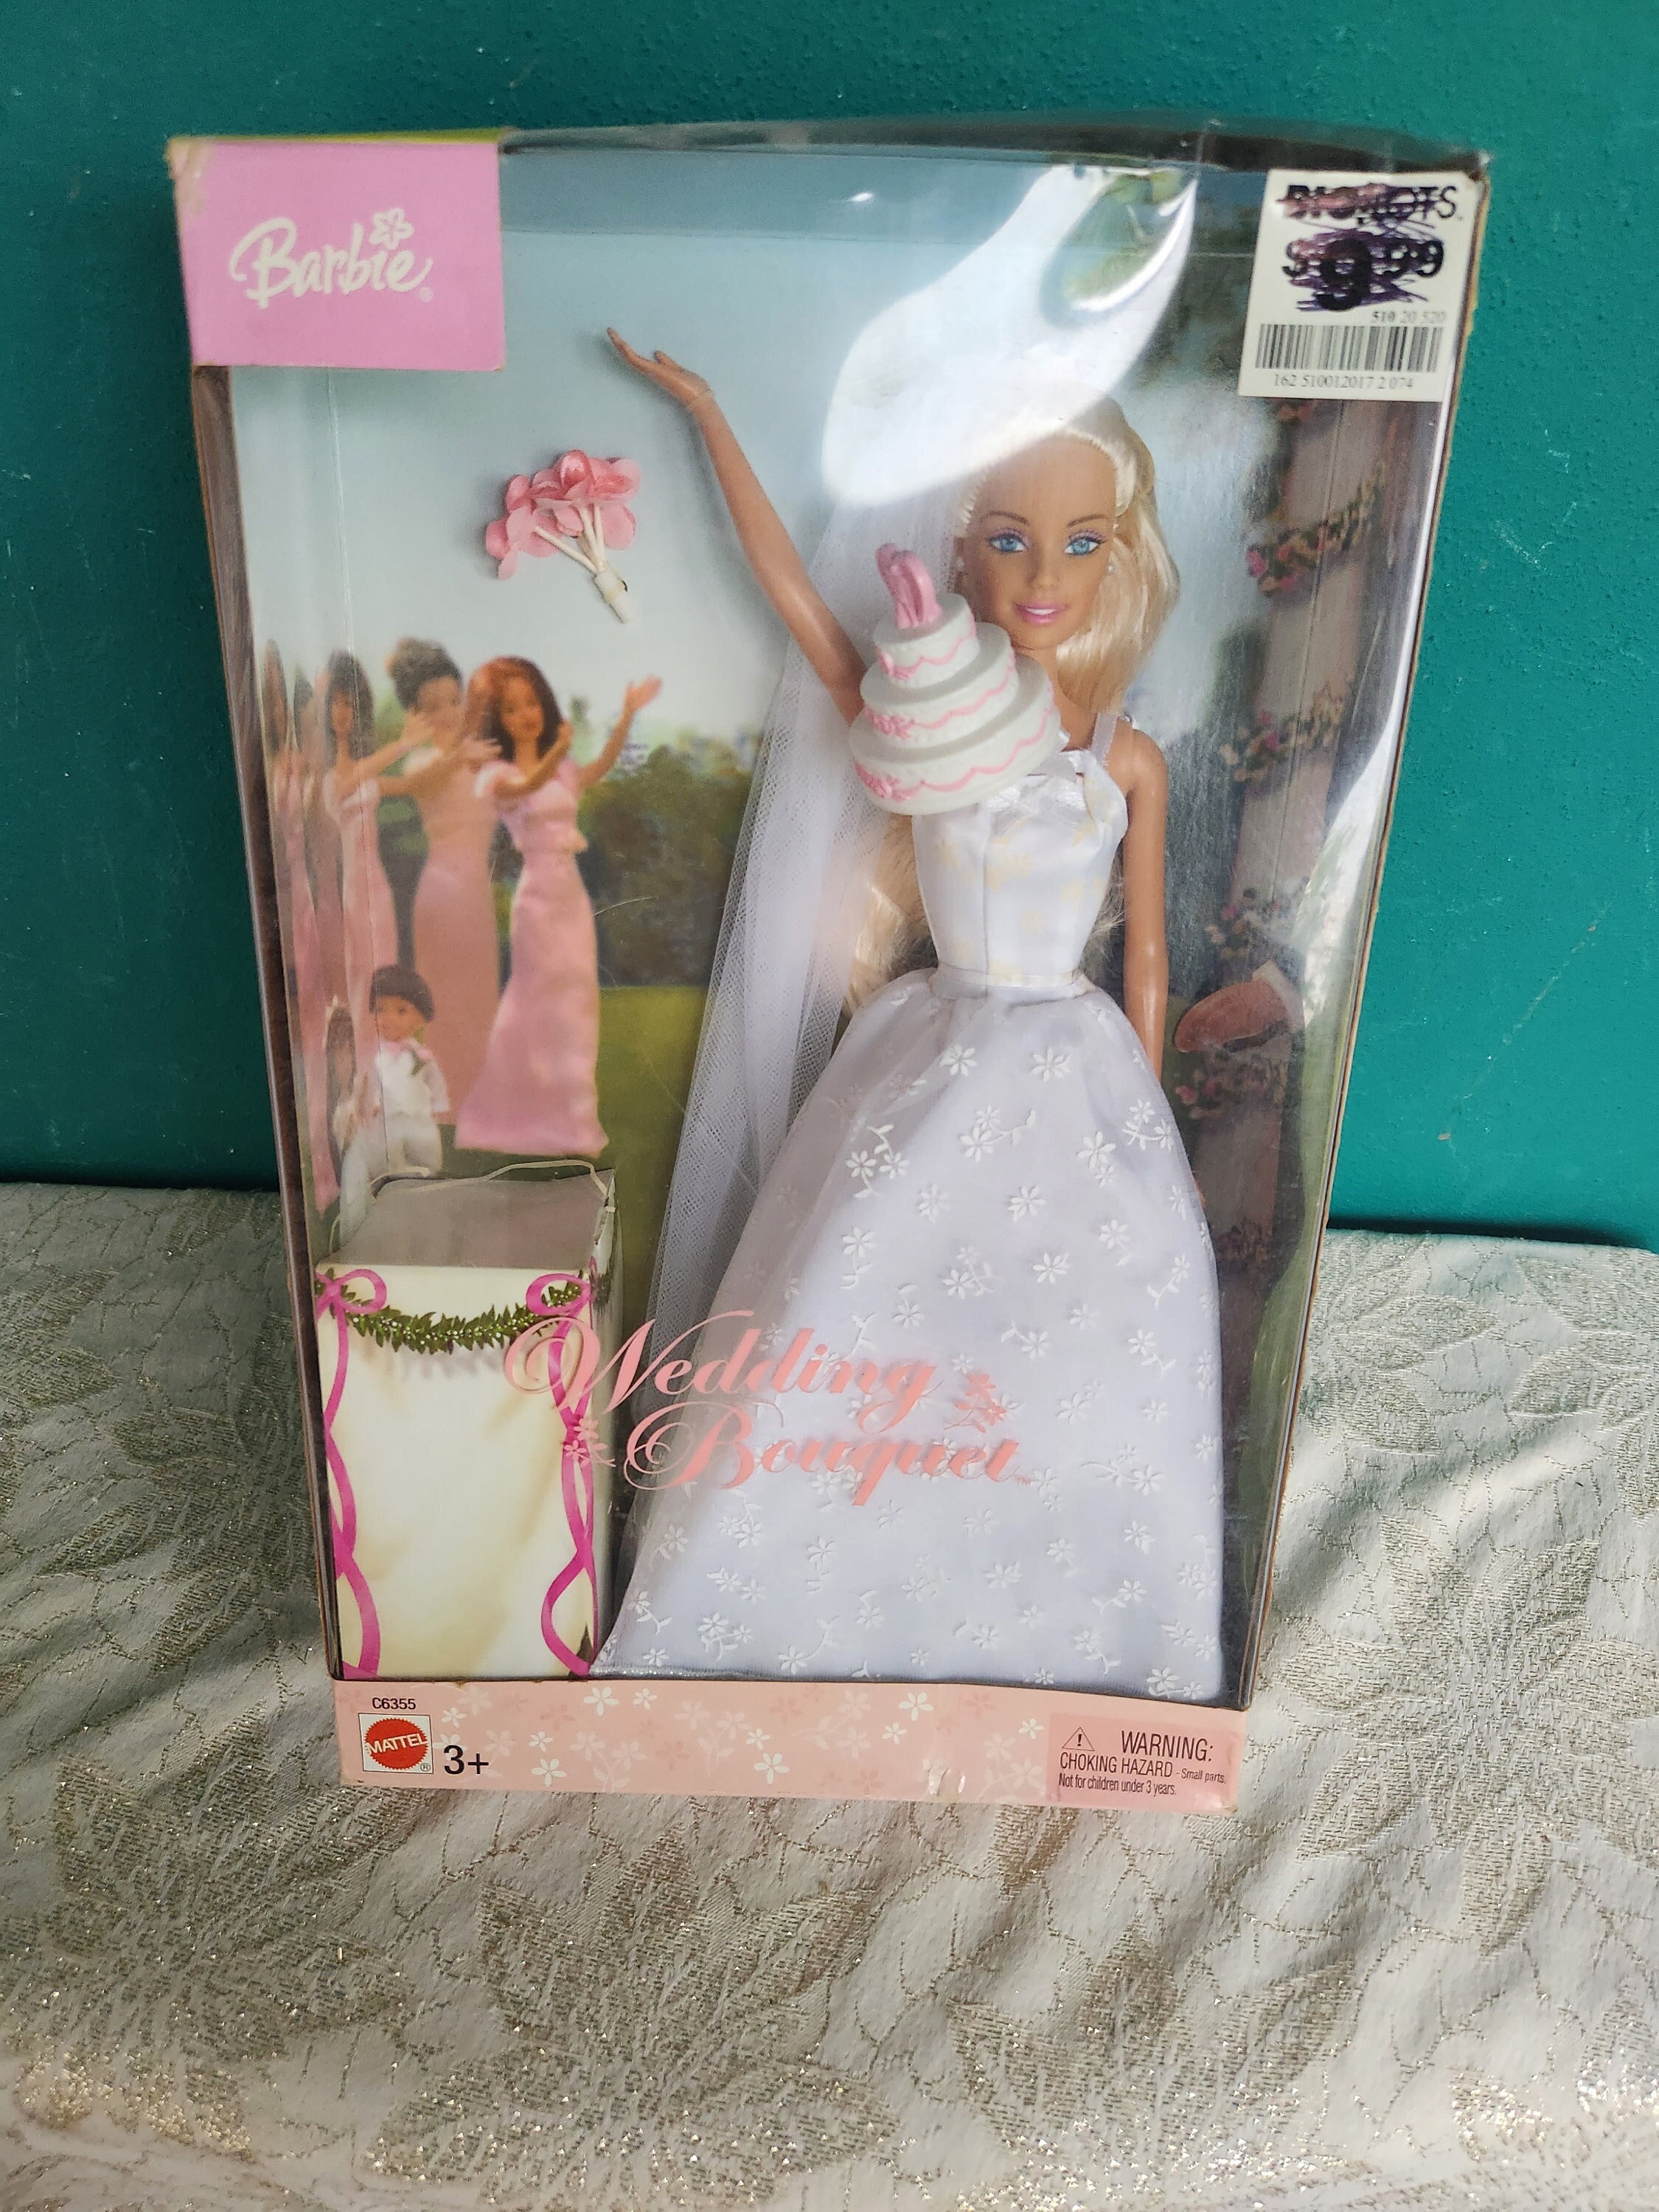 Barbie Cafe': First-ever bridal Barbie doll with personalized package!